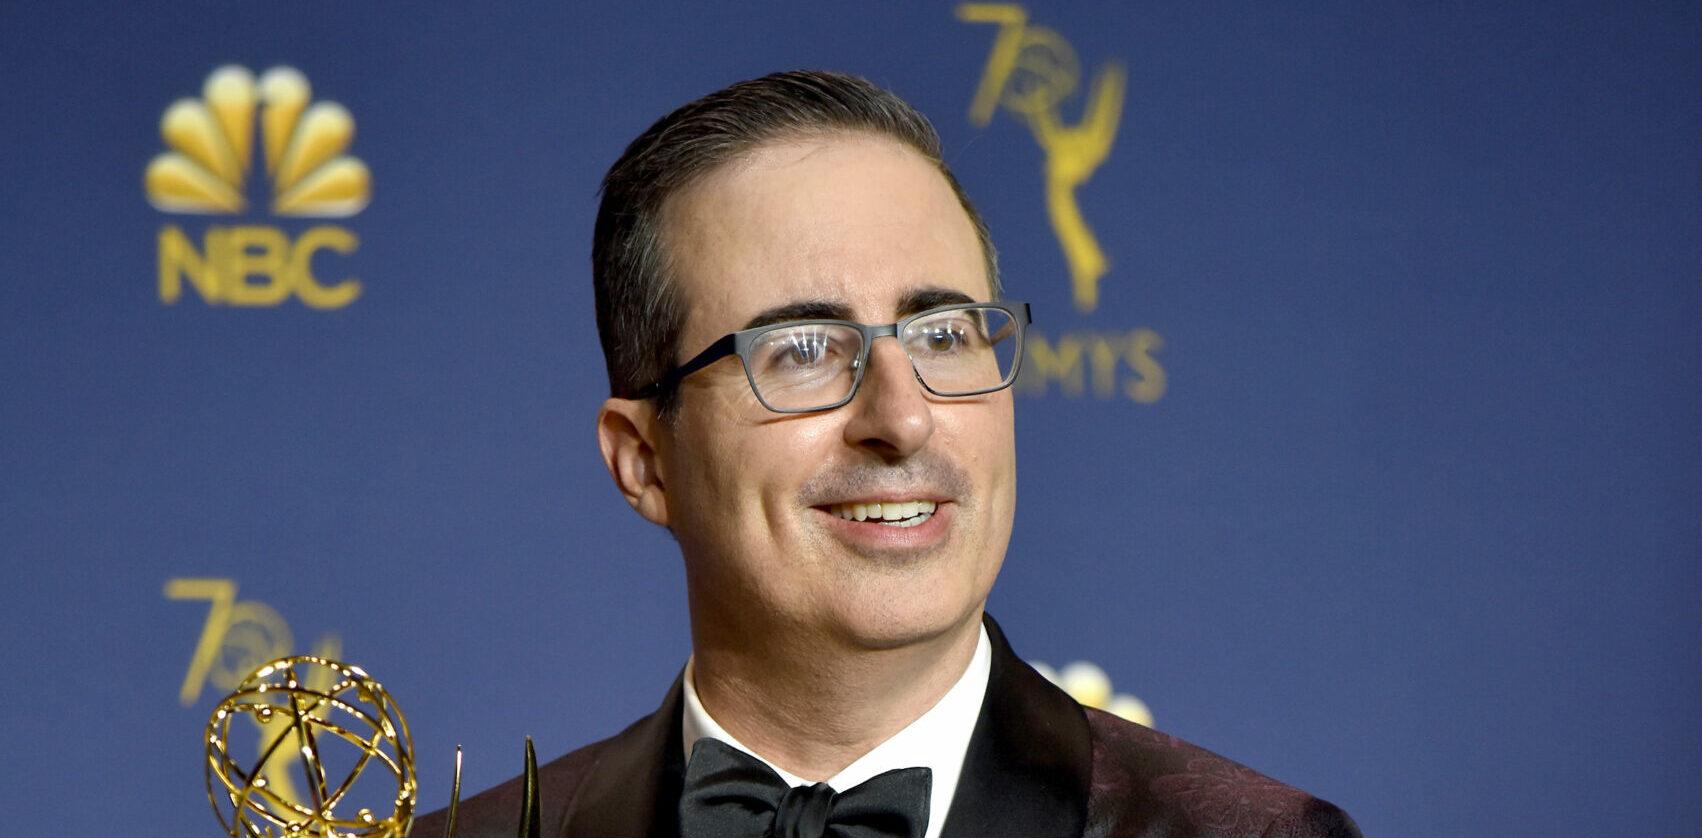 John Oliver, winner of the award for Outstanding Variety Talk Series for "Last Week Tonight with John Oliver,"